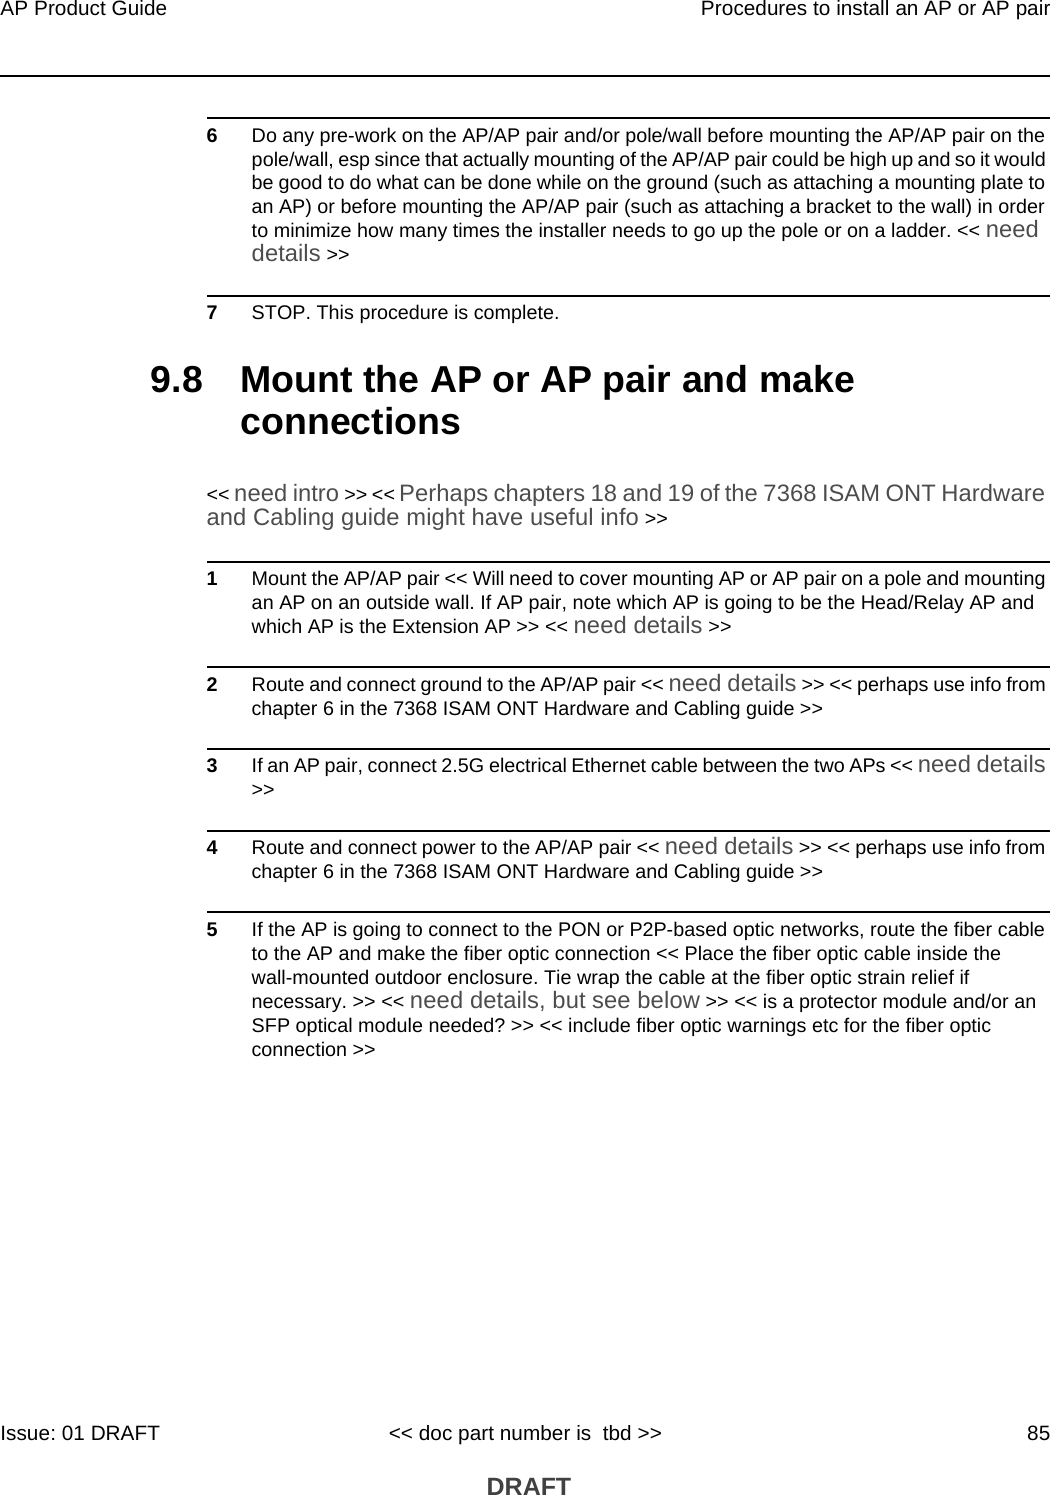 AP Product Guide Procedures to install an AP or AP pairIssue: 01 DRAFT &lt;&lt; doc part number is  tbd &gt;&gt; 85 DRAFT6Do any pre-work on the AP/AP pair and/or pole/wall before mounting the AP/AP pair on the pole/wall, esp since that actually mounting of the AP/AP pair could be high up and so it would be good to do what can be done while on the ground (such as attaching a mounting plate to an AP) or before mounting the AP/AP pair (such as attaching a bracket to the wall) in order to minimize how many times the installer needs to go up the pole or on a ladder. &lt;&lt; need details &gt;&gt;7STOP. This procedure is complete.9.8 Mount the AP or AP pair and make connections&lt;&lt; need intro &gt;&gt; &lt;&lt; Perhaps chapters 18 and 19 of the 7368 ISAM ONT Hardware and Cabling guide might have useful info &gt;&gt; 1Mount the AP/AP pair &lt;&lt; Will need to cover mounting AP or AP pair on a pole and mounting an AP on an outside wall. If AP pair, note which AP is going to be the Head/Relay AP and which AP is the Extension AP &gt;&gt; &lt;&lt; need details &gt;&gt;2Route and connect ground to the AP/AP pair &lt;&lt; need details &gt;&gt; &lt;&lt; perhaps use info from chapter 6 in the 7368 ISAM ONT Hardware and Cabling guide &gt;&gt;3If an AP pair, connect 2.5G electrical Ethernet cable between the two APs &lt;&lt; need details &gt;&gt;4Route and connect power to the AP/AP pair &lt;&lt; need details &gt;&gt; &lt;&lt; perhaps use info from chapter 6 in the 7368 ISAM ONT Hardware and Cabling guide &gt;&gt;5If the AP is going to connect to the PON or P2P-based optic networks, route the fiber cable to the AP and make the fiber optic connection &lt;&lt; Place the fiber optic cable inside the wall-mounted outdoor enclosure. Tie wrap the cable at the fiber optic strain relief if necessary. &gt;&gt; &lt;&lt; need details, but see below &gt;&gt; &lt;&lt; is a protector module and/or an SFP optical module needed? &gt;&gt; &lt;&lt; include fiber optic warnings etc for the fiber optic connection &gt;&gt;